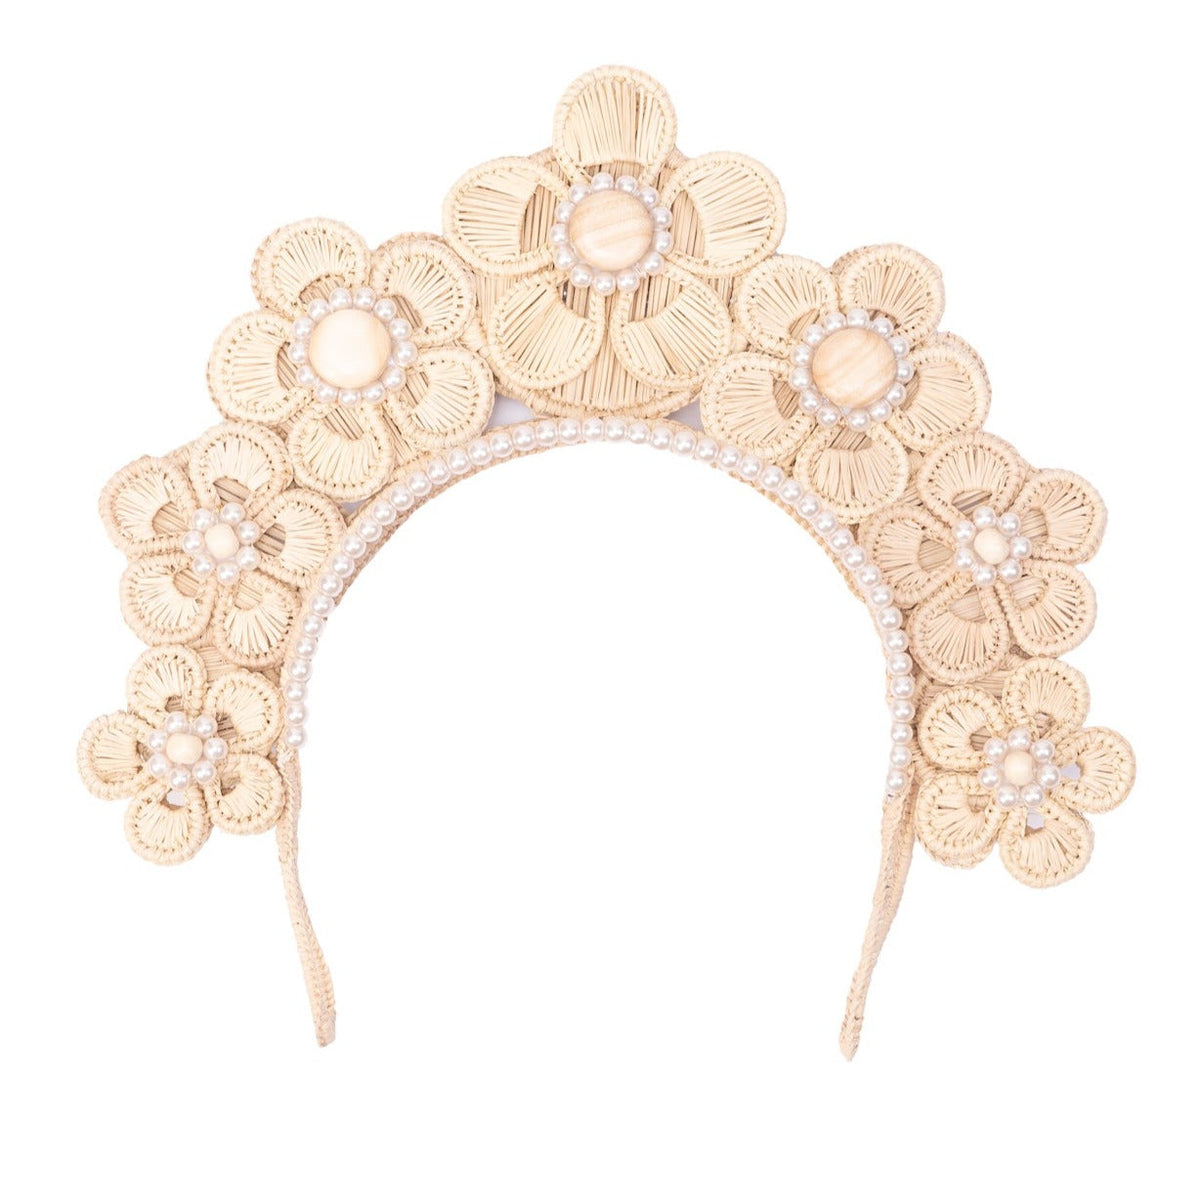 Flower Iraca Headpiece with Wooden Beads & Faux Pearl